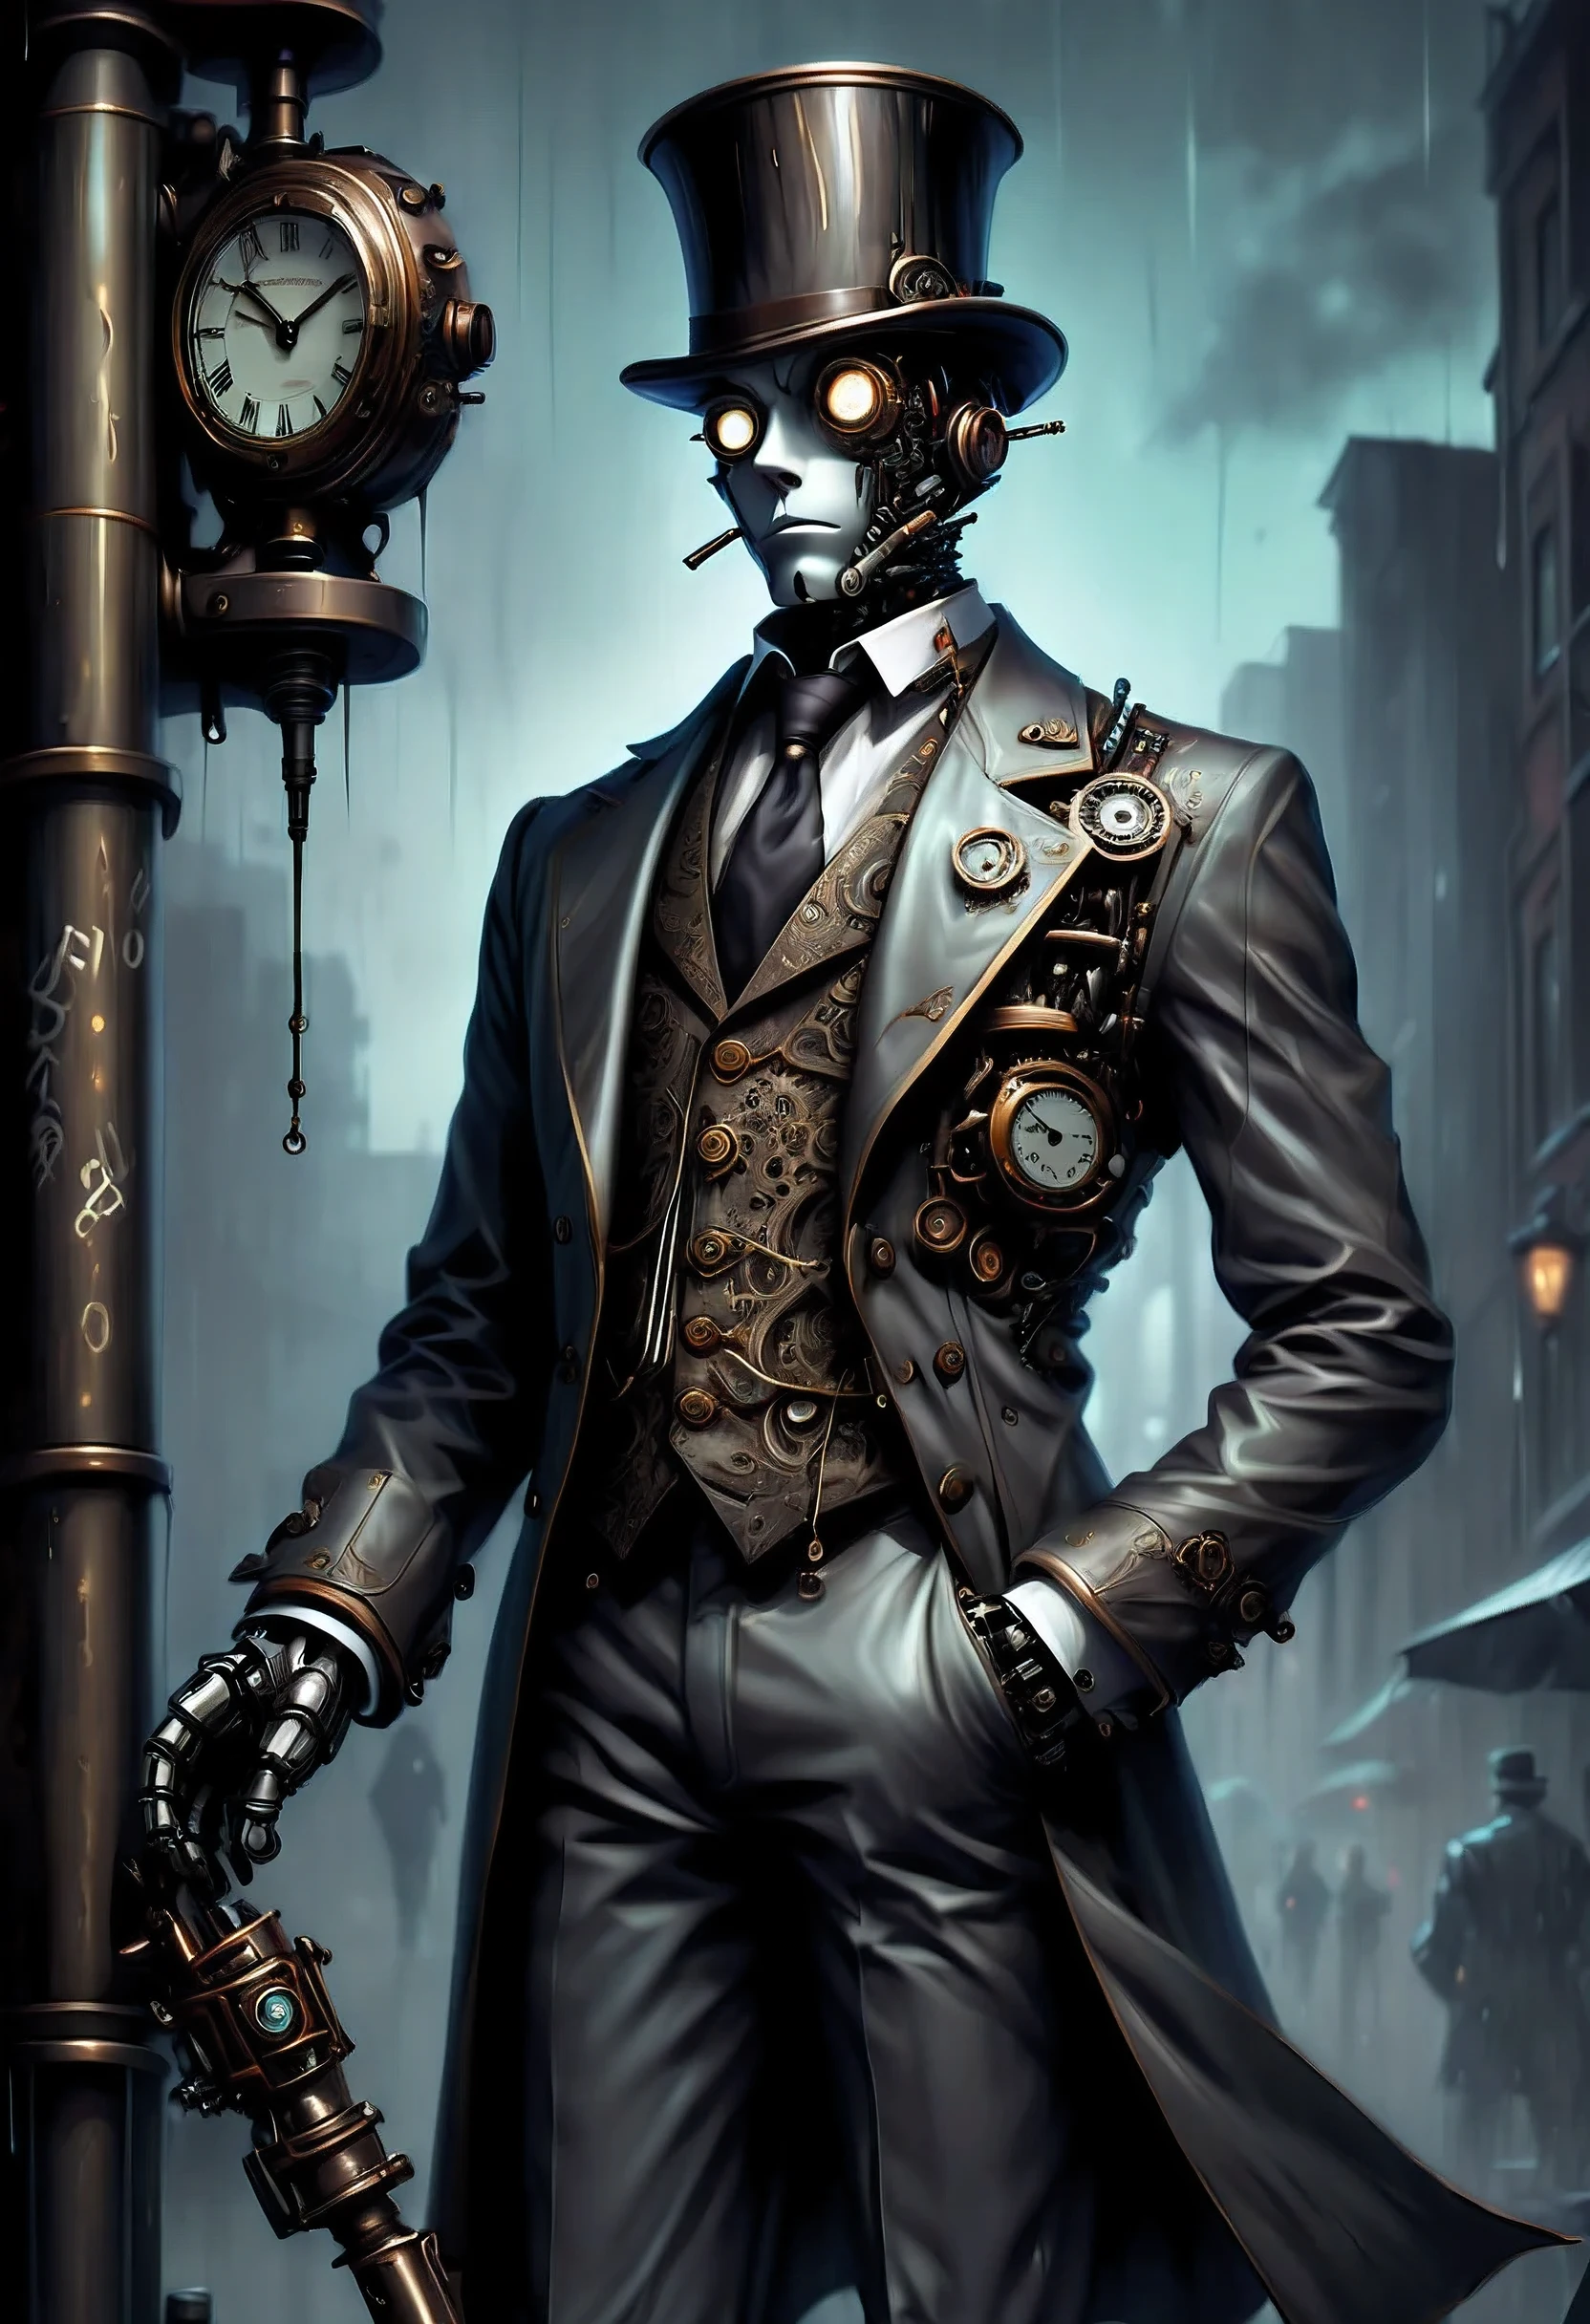 Robot Butler with Mechanical Engineering Profile, steampunk tie, detail soft shadow, Mechanical face with an ennui atmosphere, Mechanical decorative cane with one hand, frombelow, Mechanically with intricate and insane details, About the intricately detailed butler uniform, subtle lighting elements, cool beauty mechanical, Full body shot, From Side, nice cyber butler outfit, An atmosphere of beauty like a finely honed blade, very fine shadows, drizzle doodle background, eternal time clock, It feels like the wind of eternity, Lonely atmosphere, dim white lighting, street art graffiti inspiration, Eyes that show sadness, brave expression, darkest twilight, Detail of darkest core oil paint illustration, ultra clear details, very clear texture, complex brush strokes, High quality, High resolution, of the highest quality,